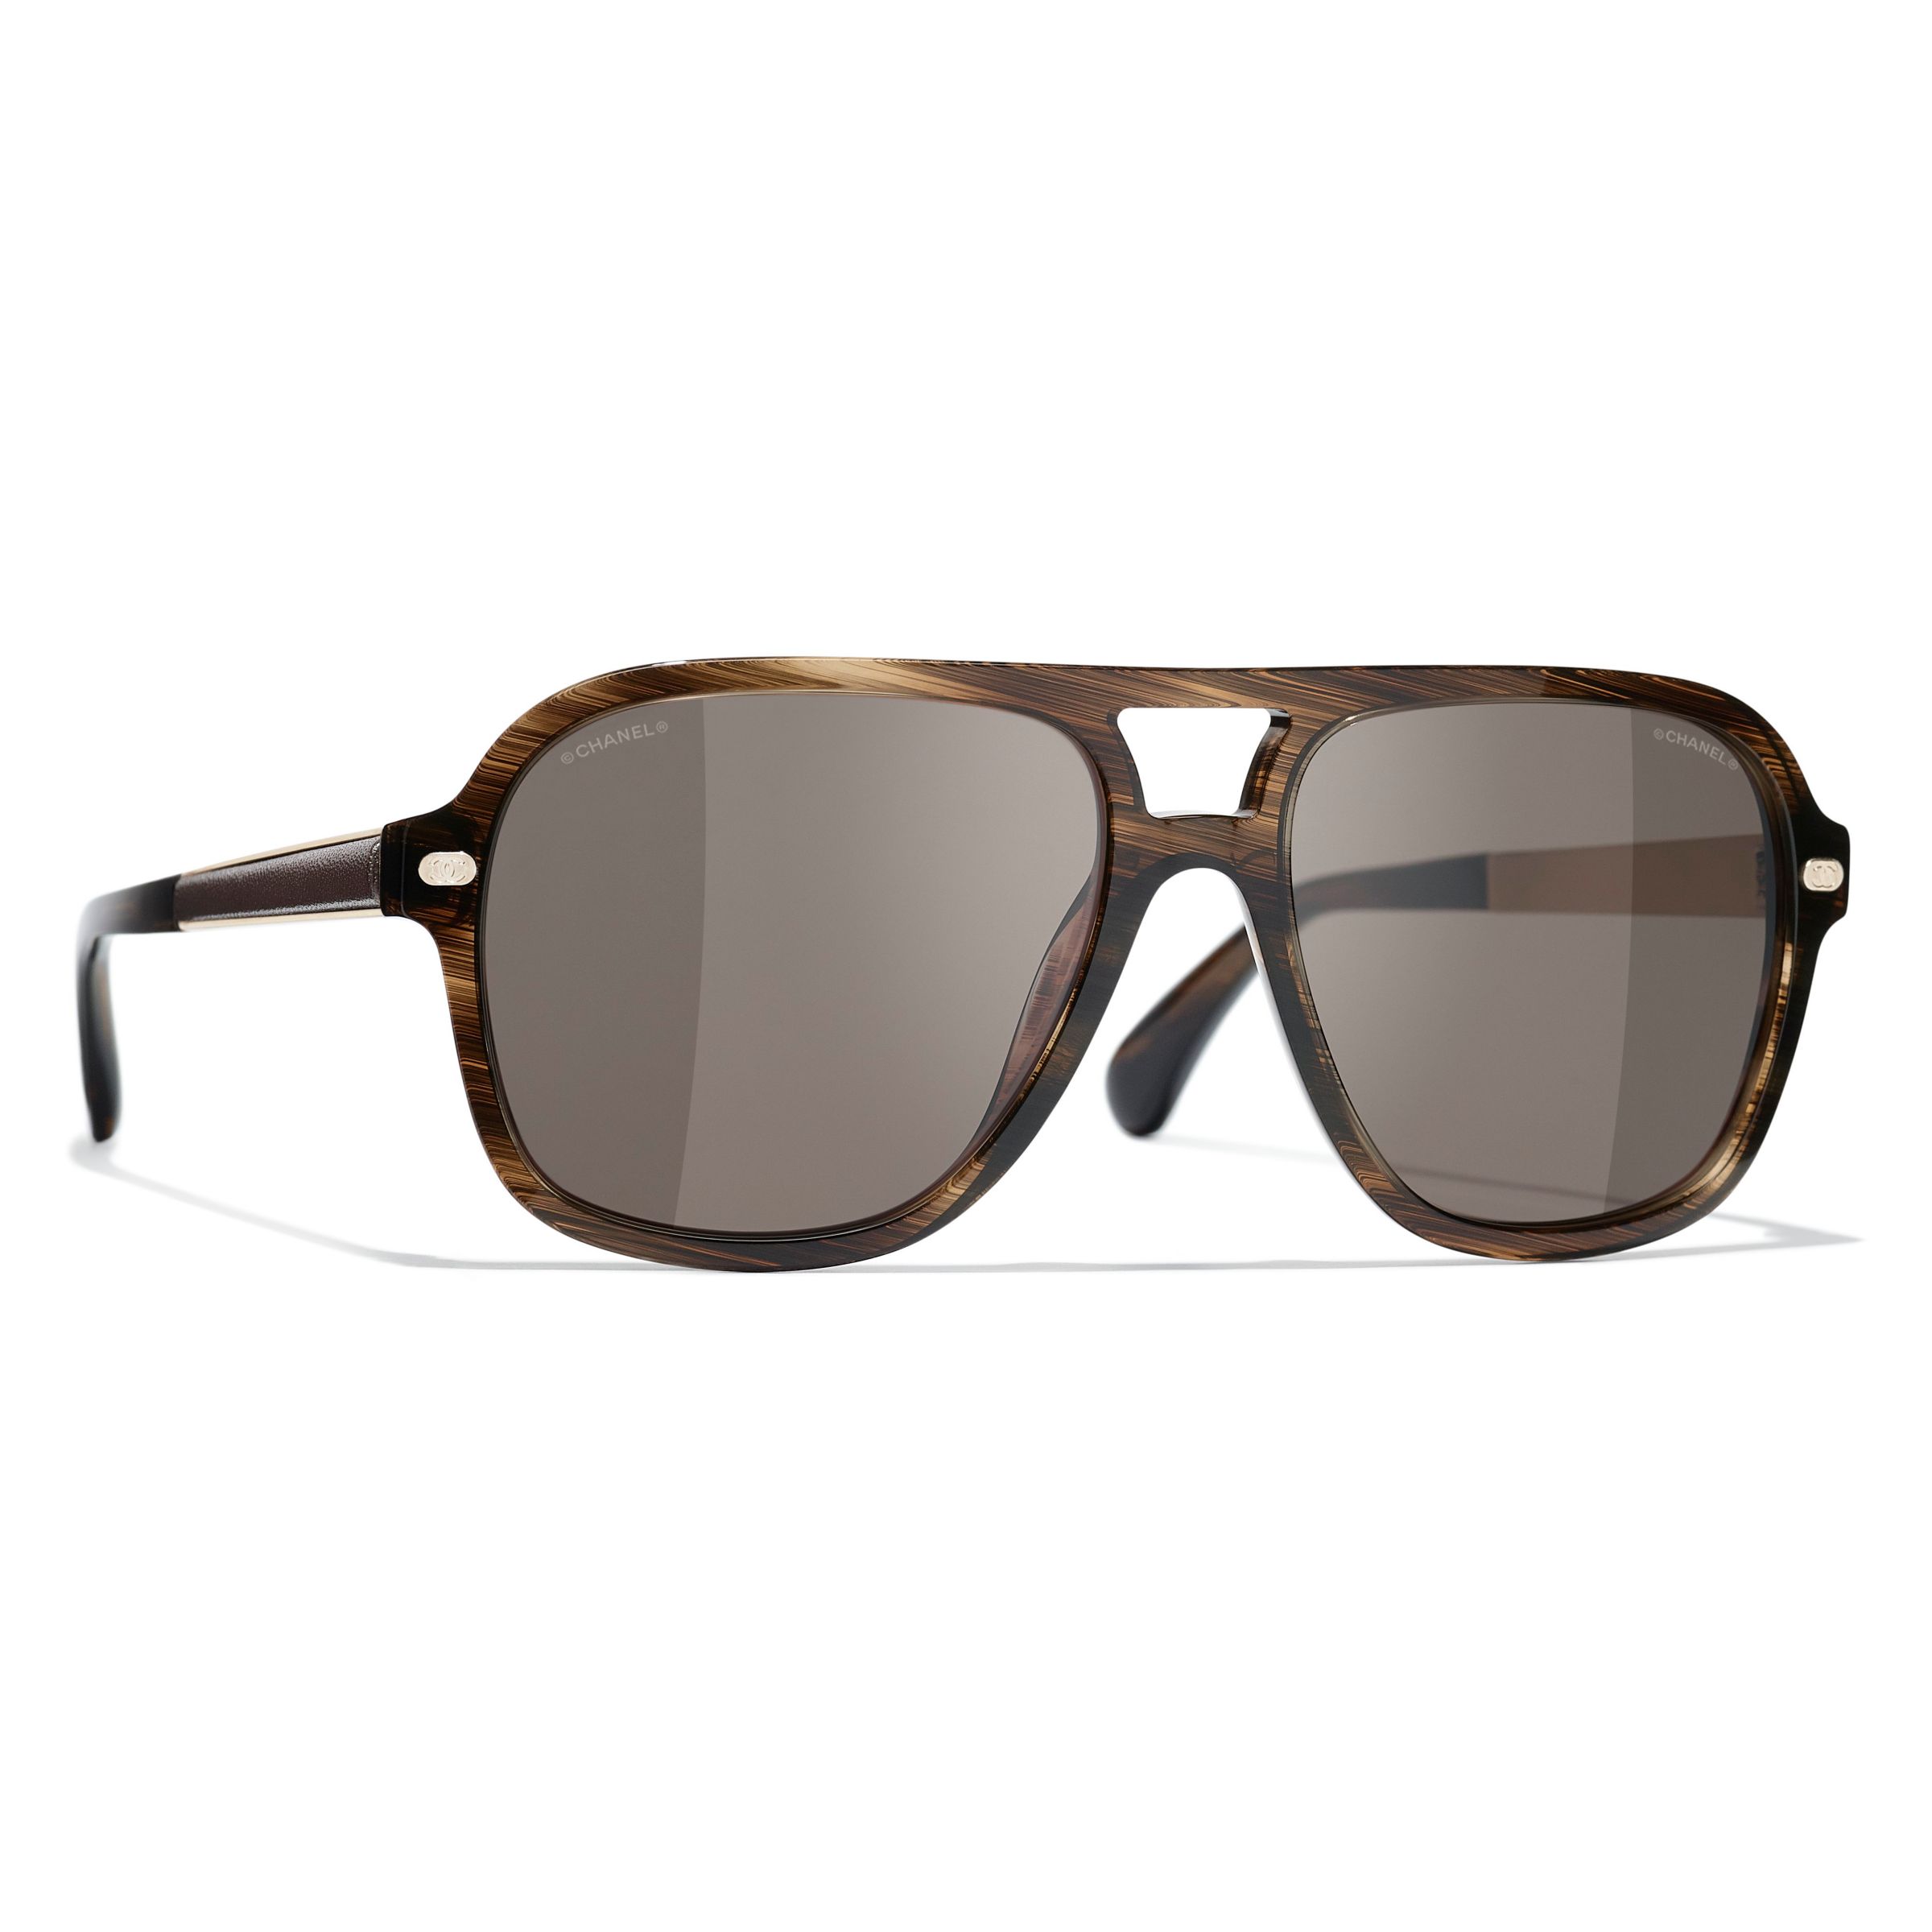 CHANEL Pilot Sunglasses CH4256 Gold/Brown at John Lewis & Partners